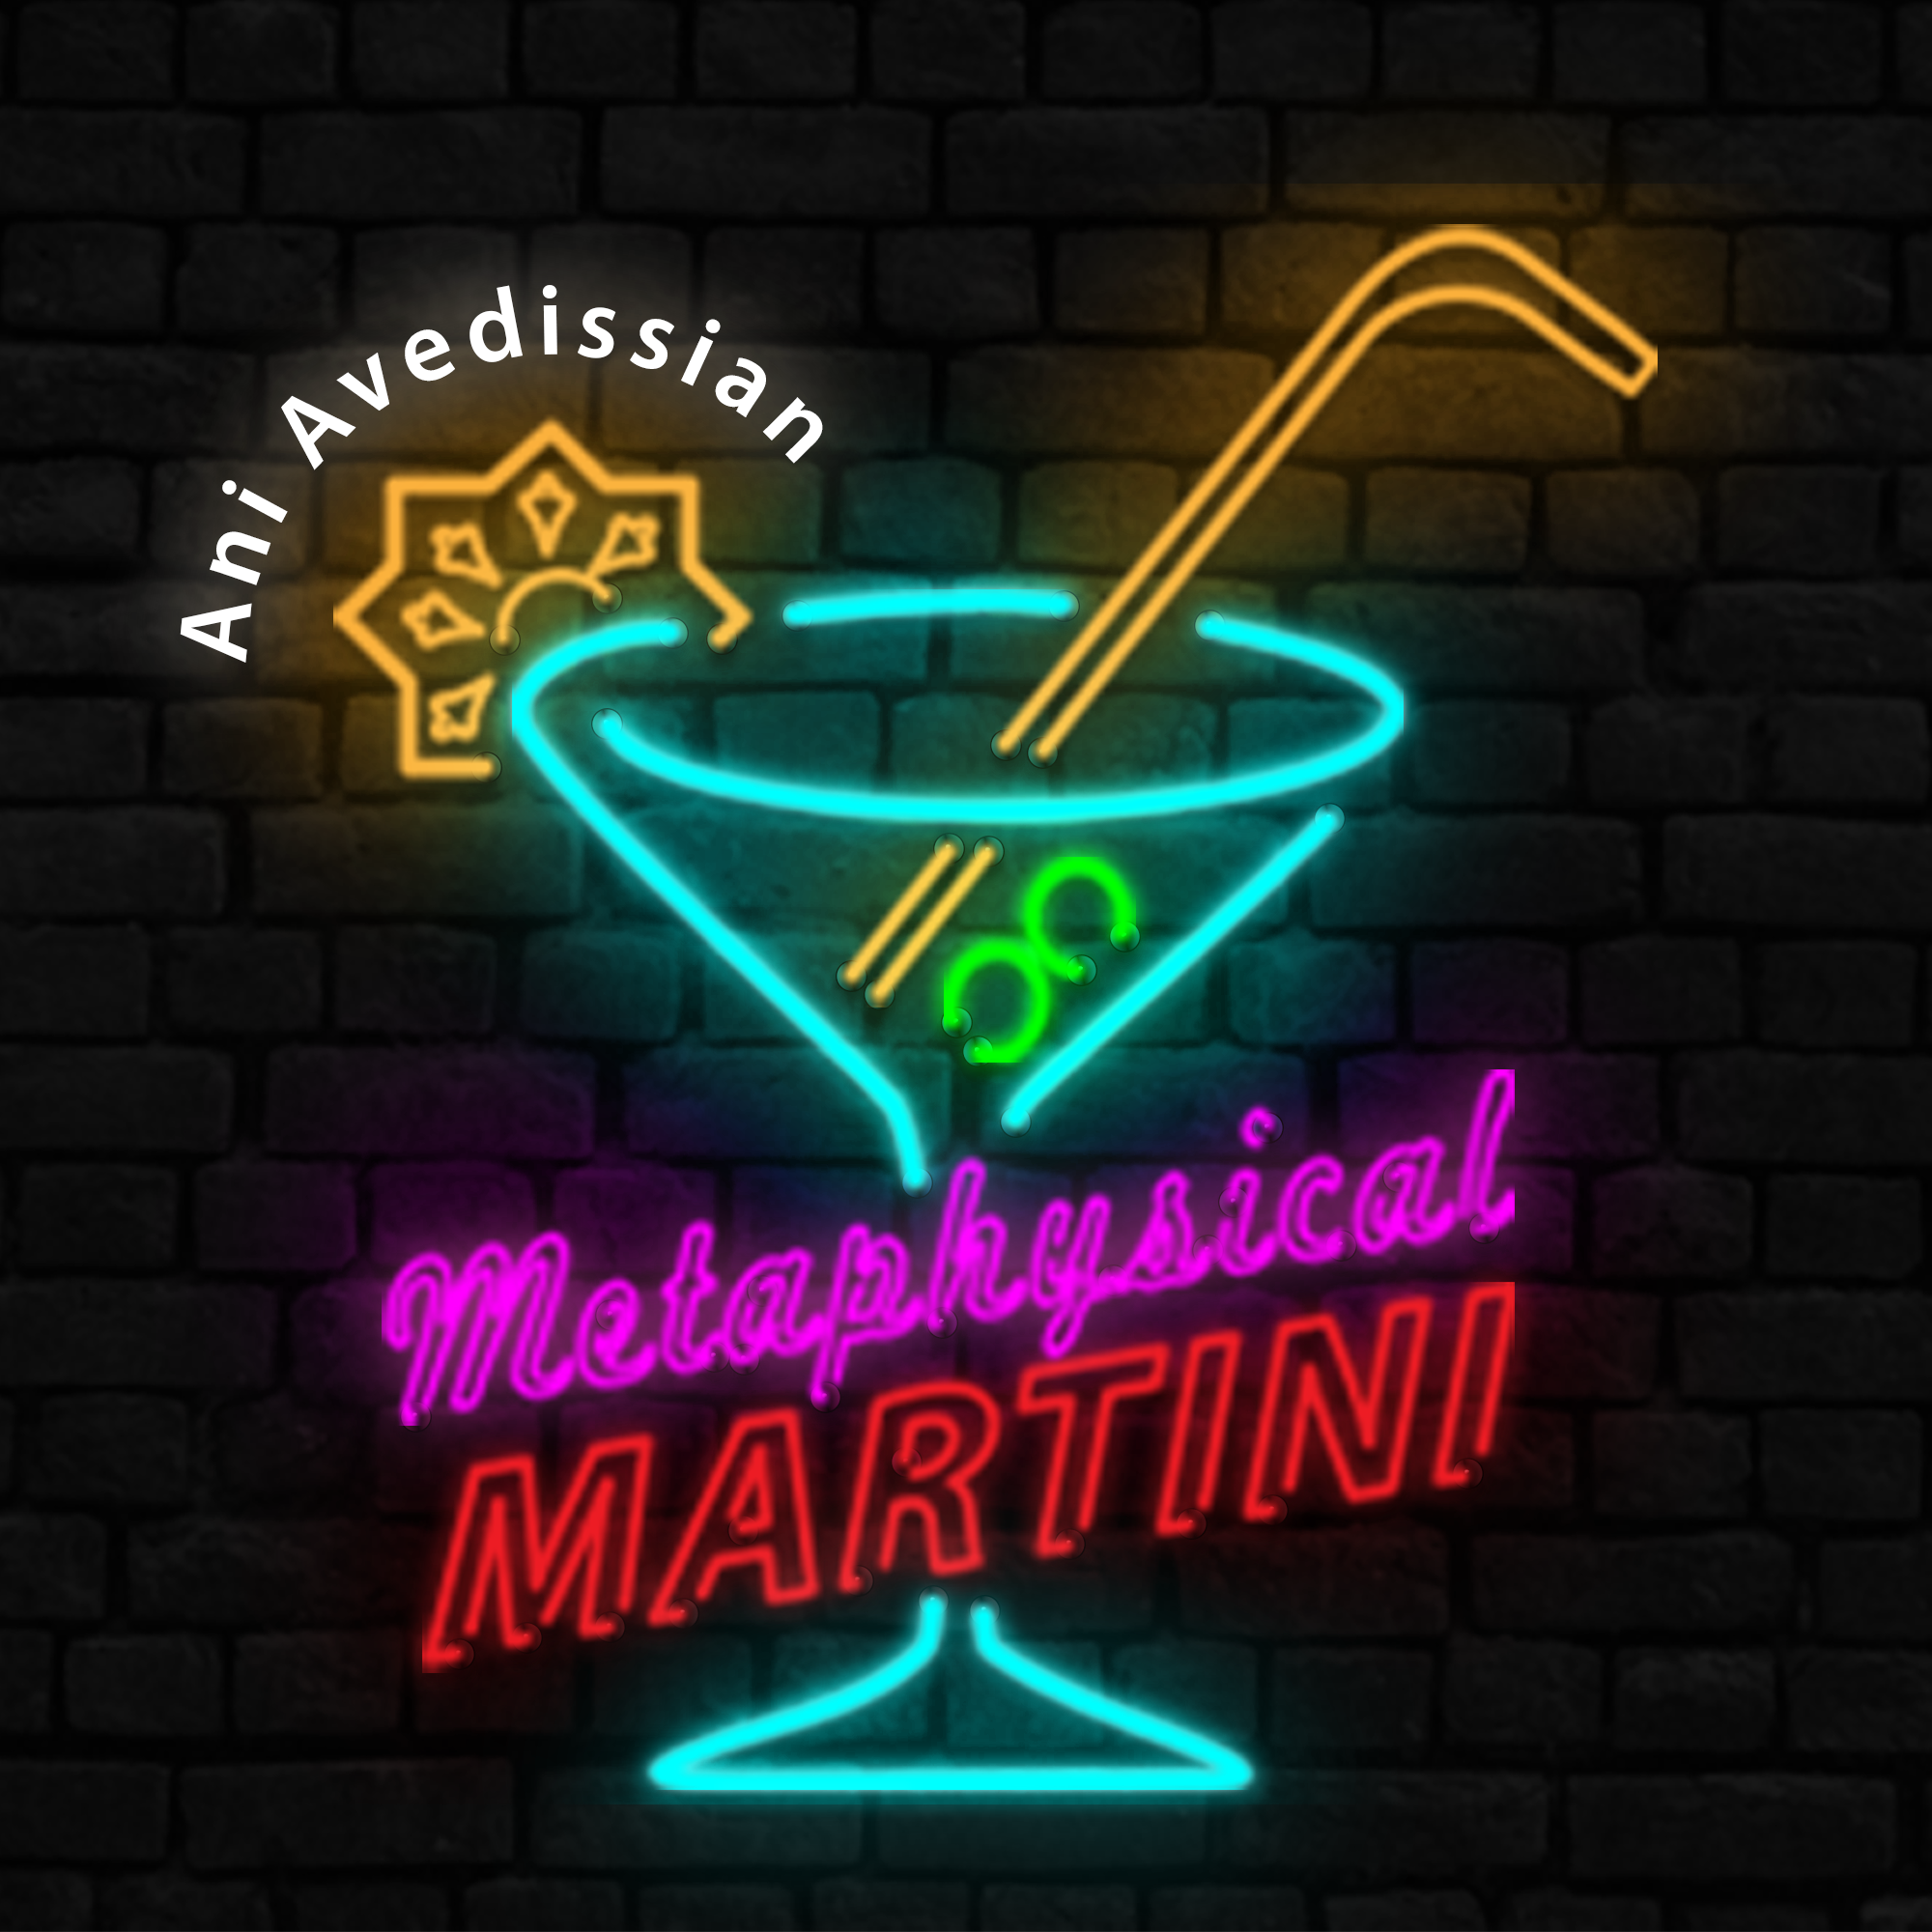 "Metaphysical Martini"   05/25/2022 - Clueless sheep and a woeful lack of leadership